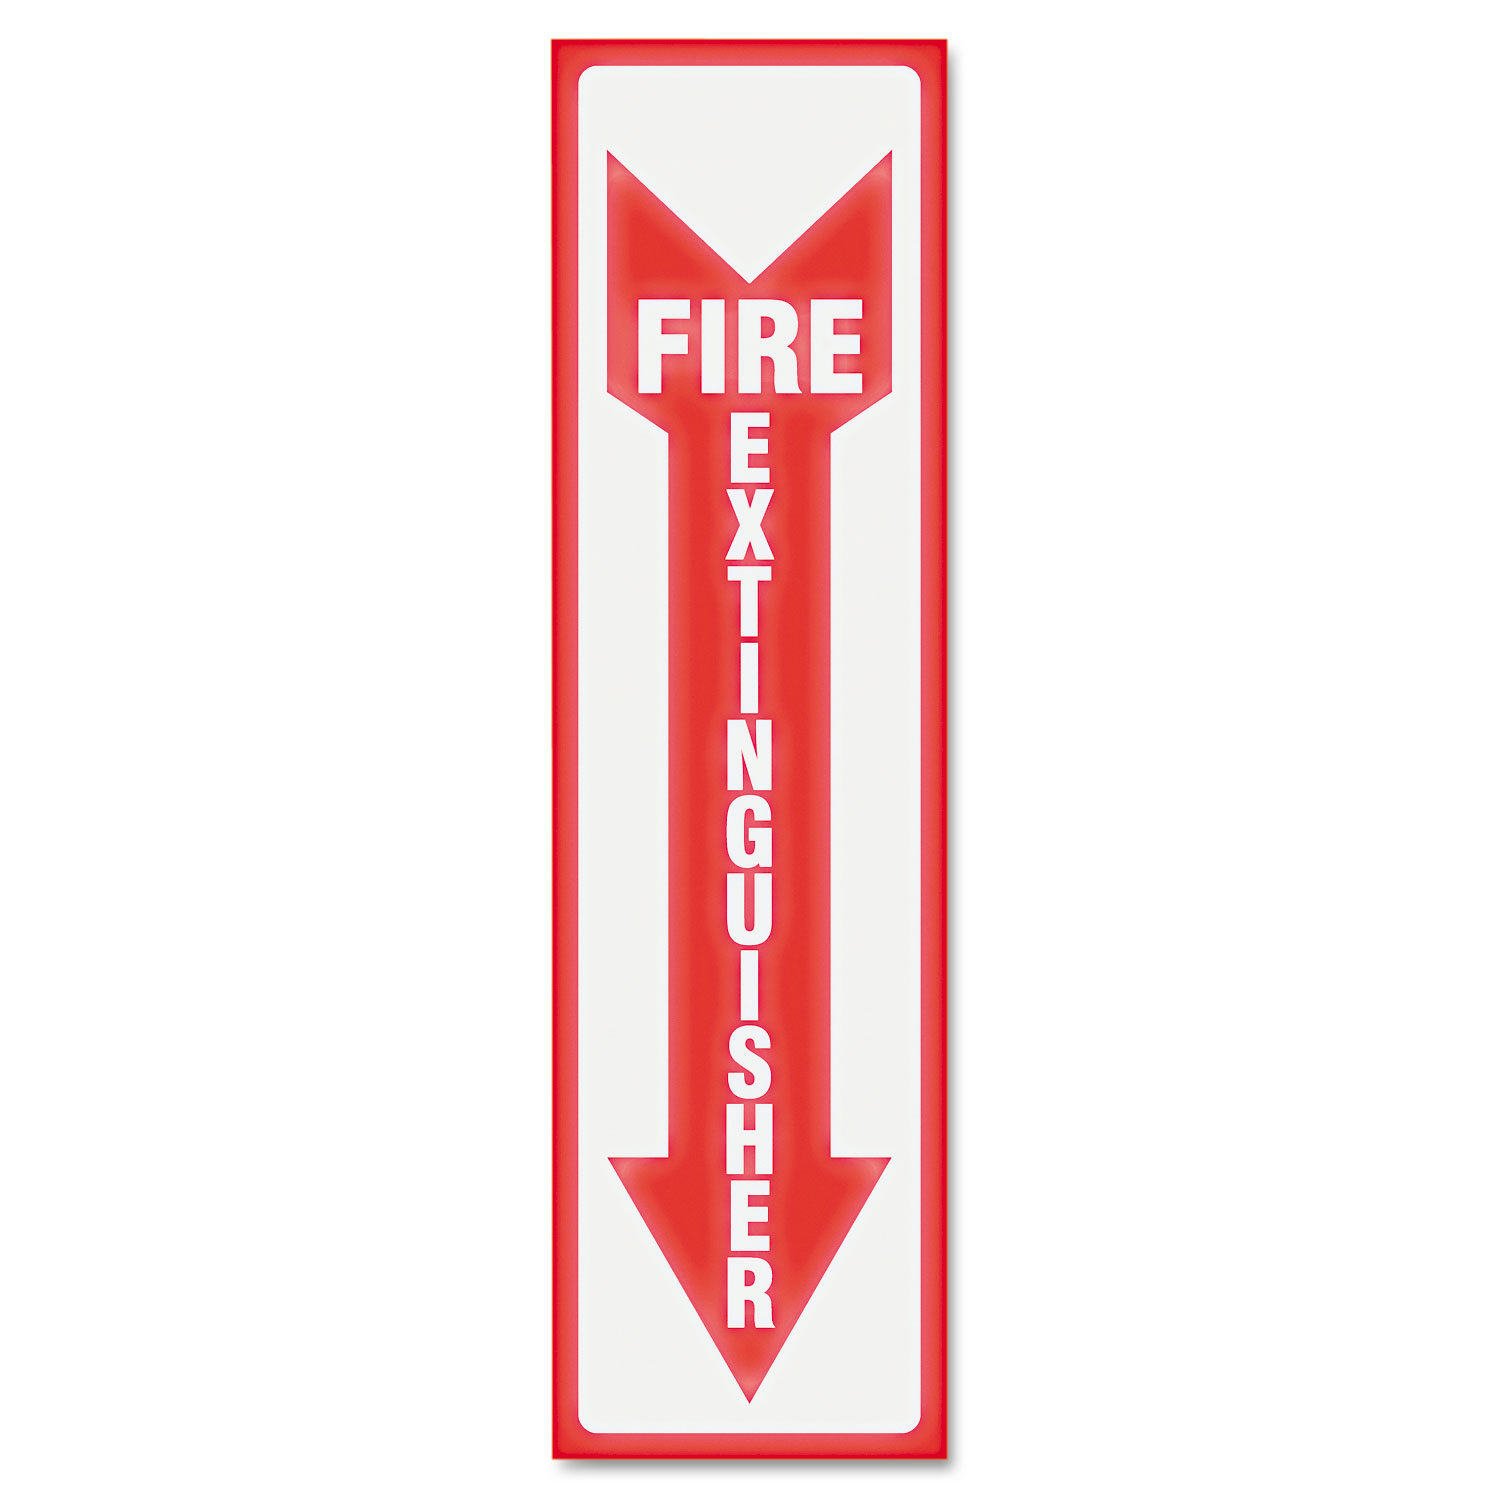 Glow In The Dark Sign, 4 x 13, Red Glow, Fire Extinguisher